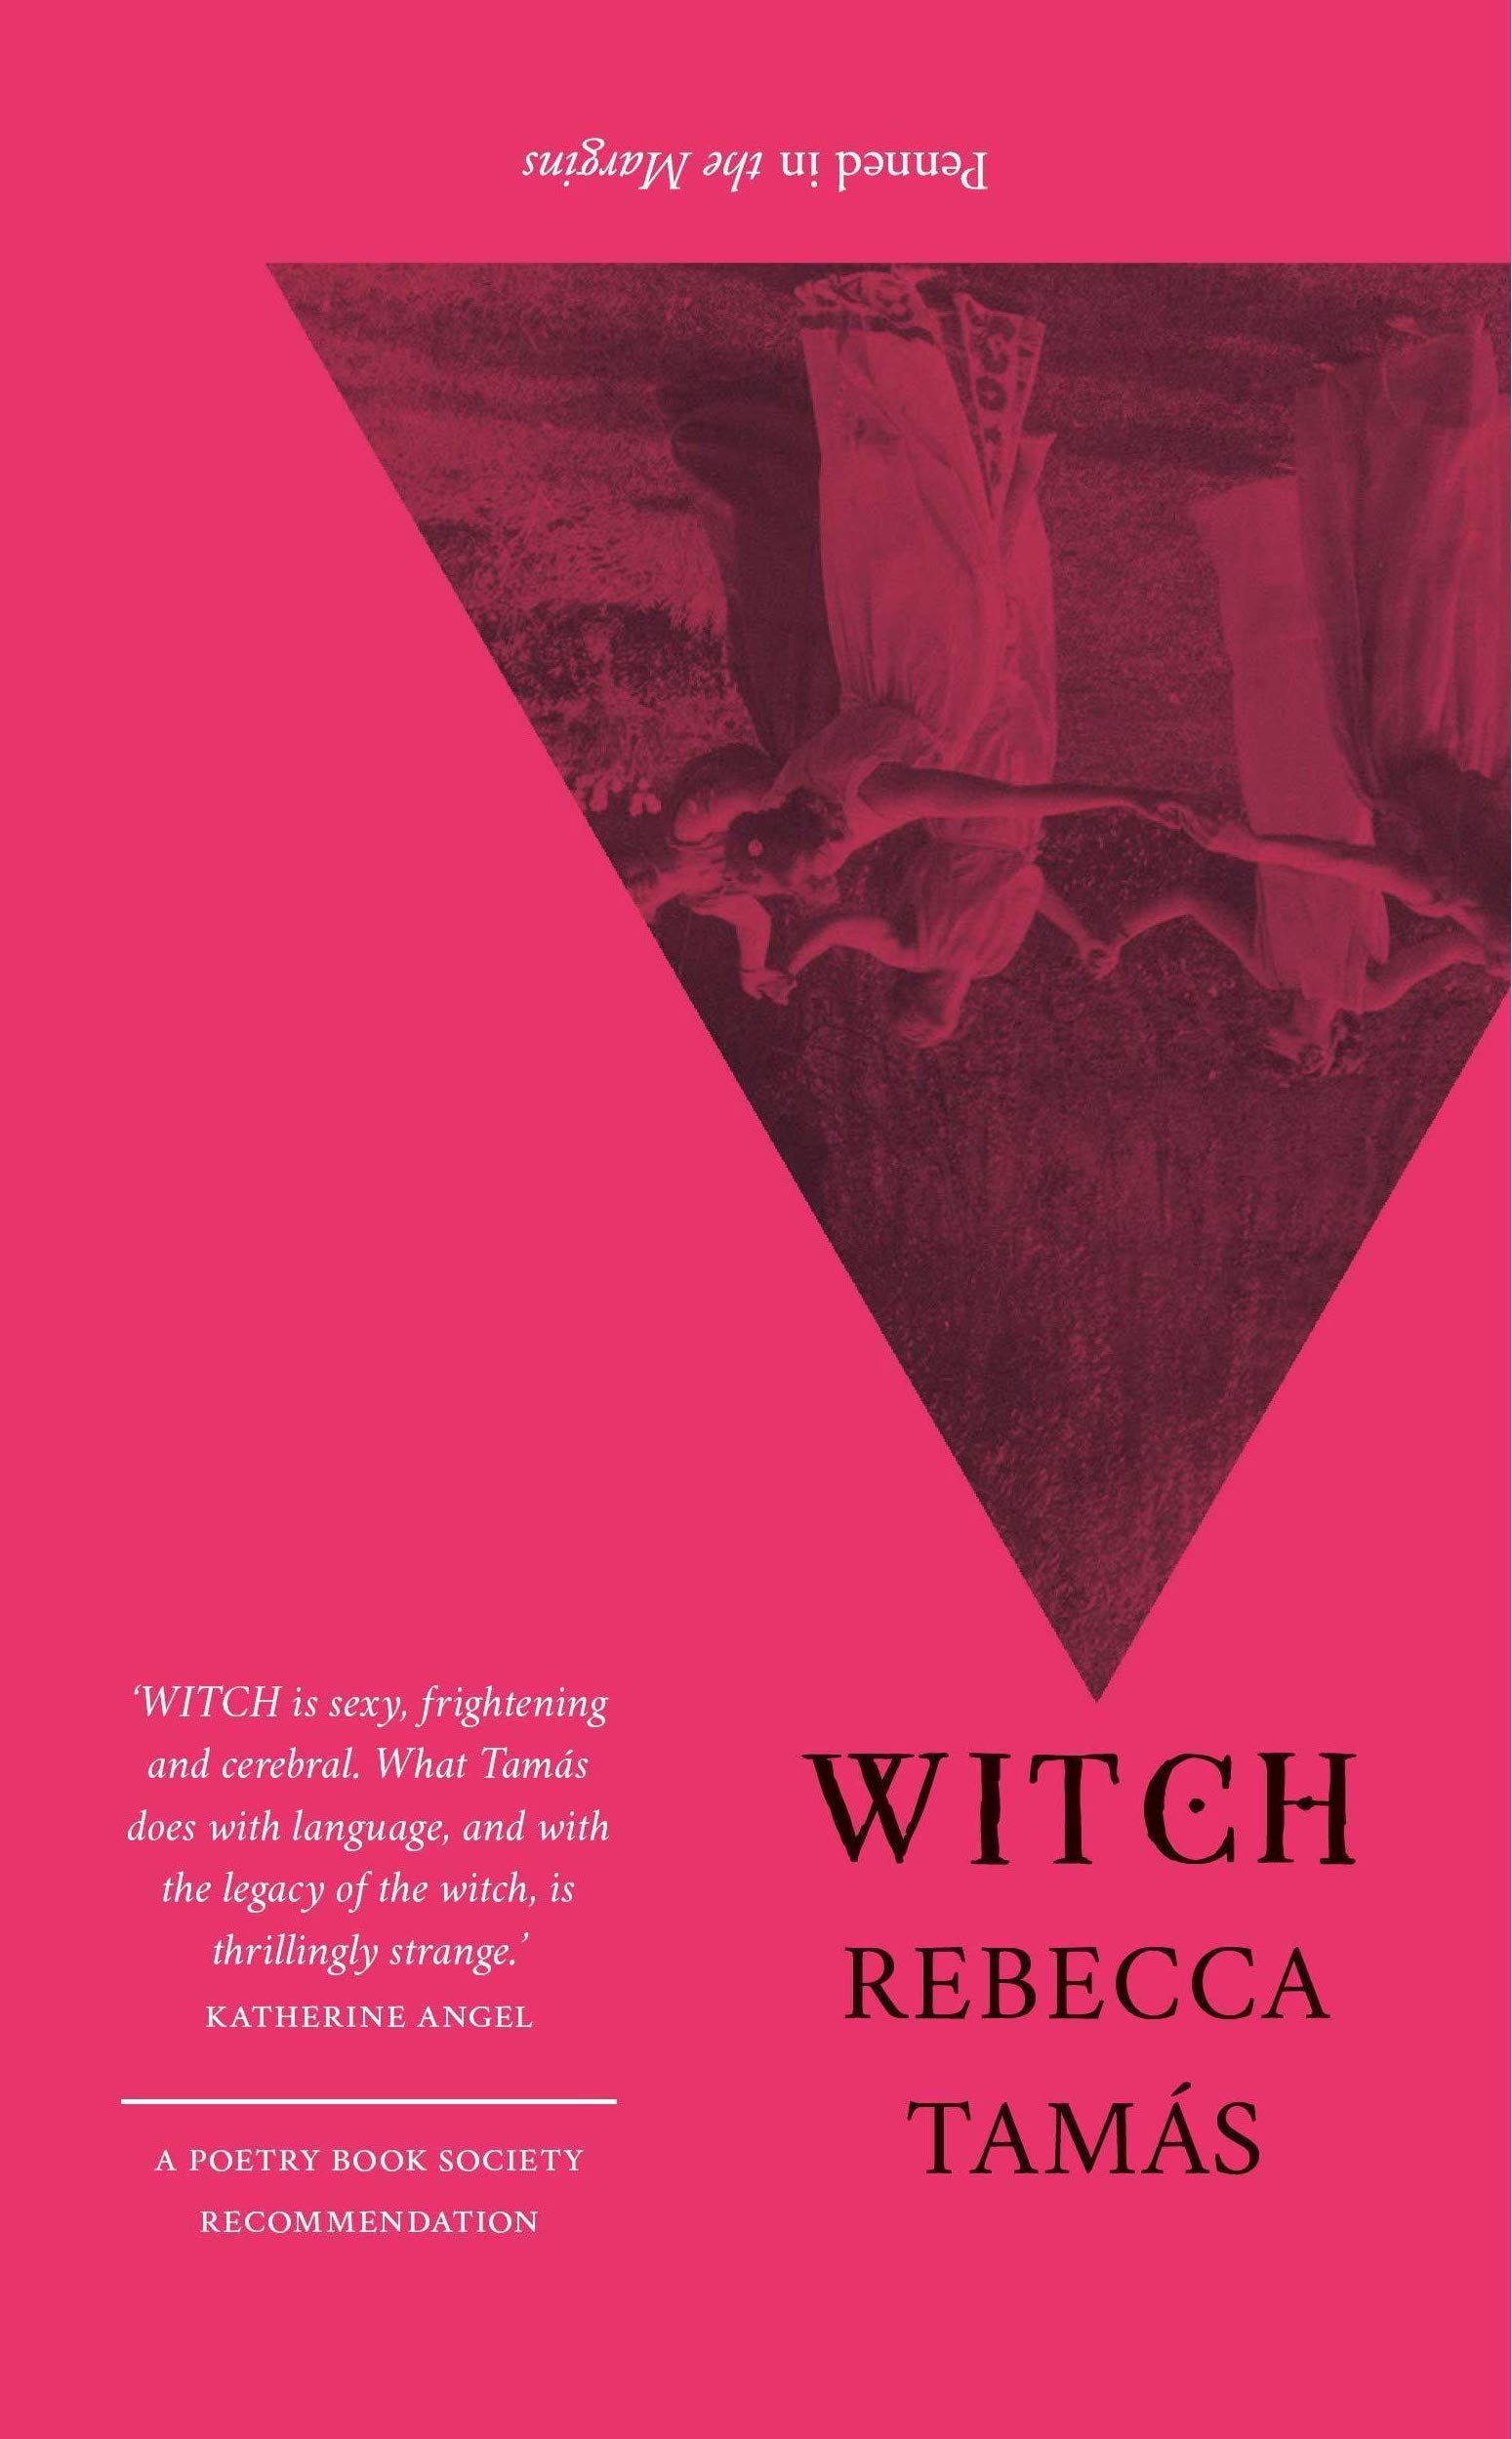 Night of the Witch by Sara Raasch